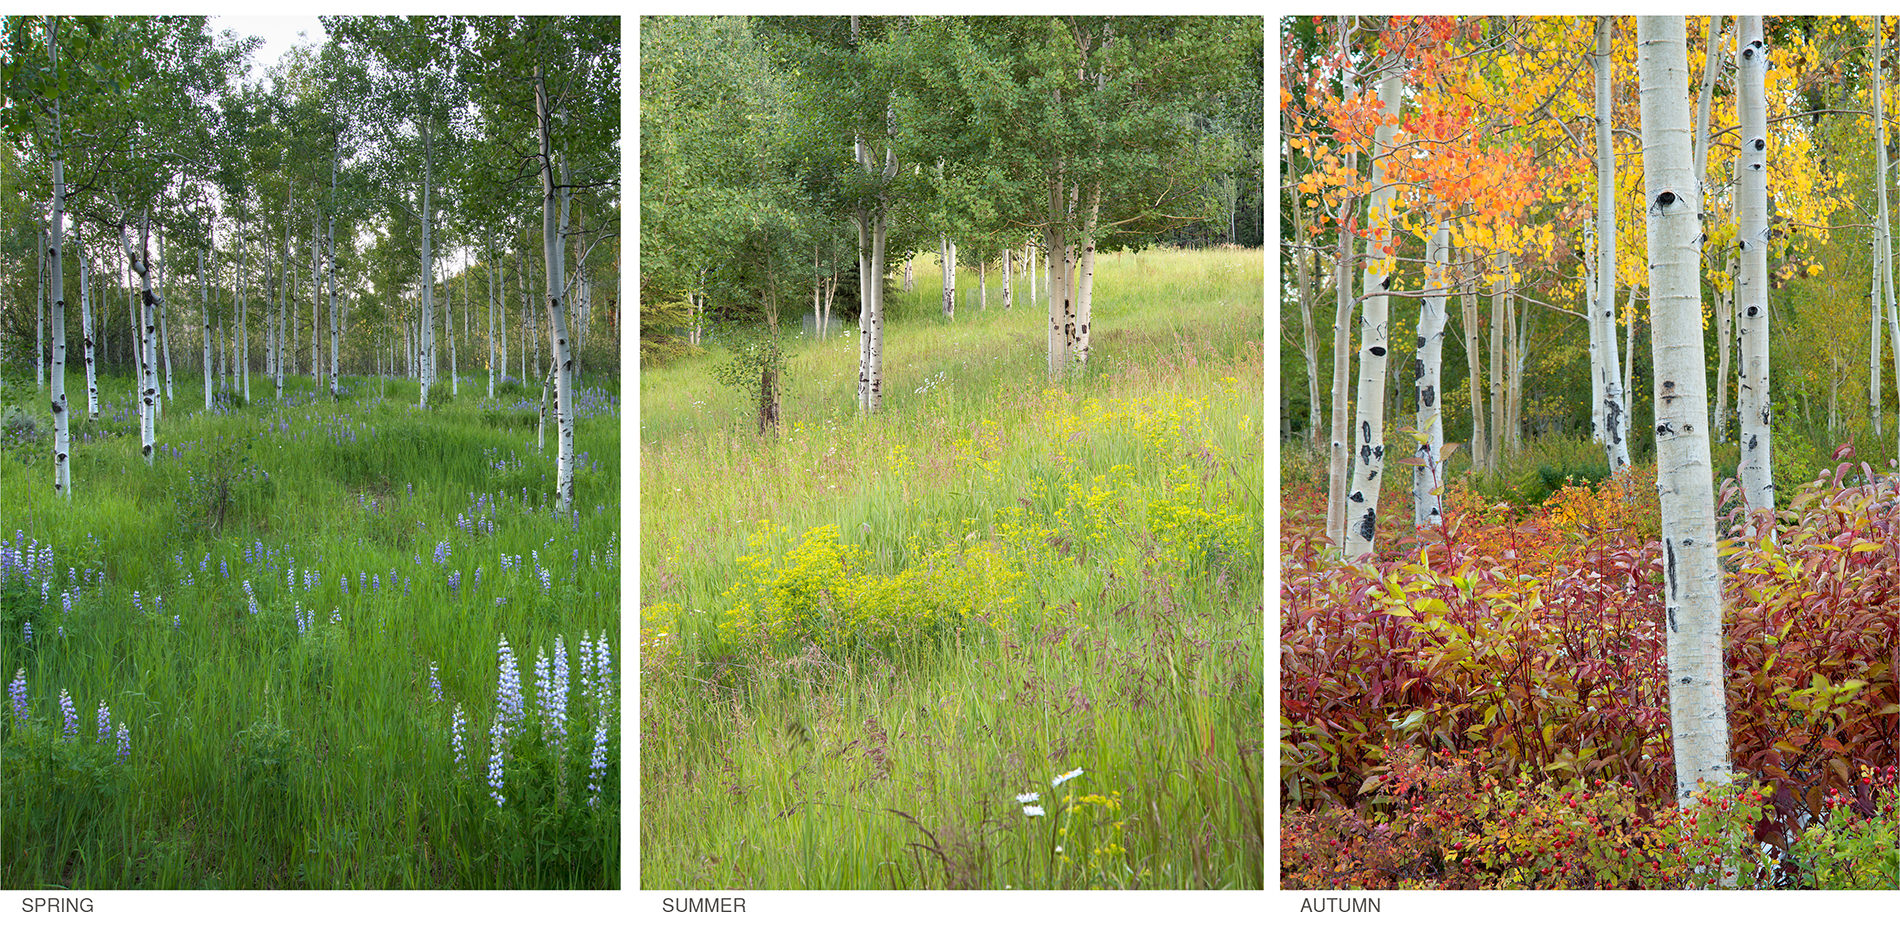 Meadow During Spring, Summer, and Autumn